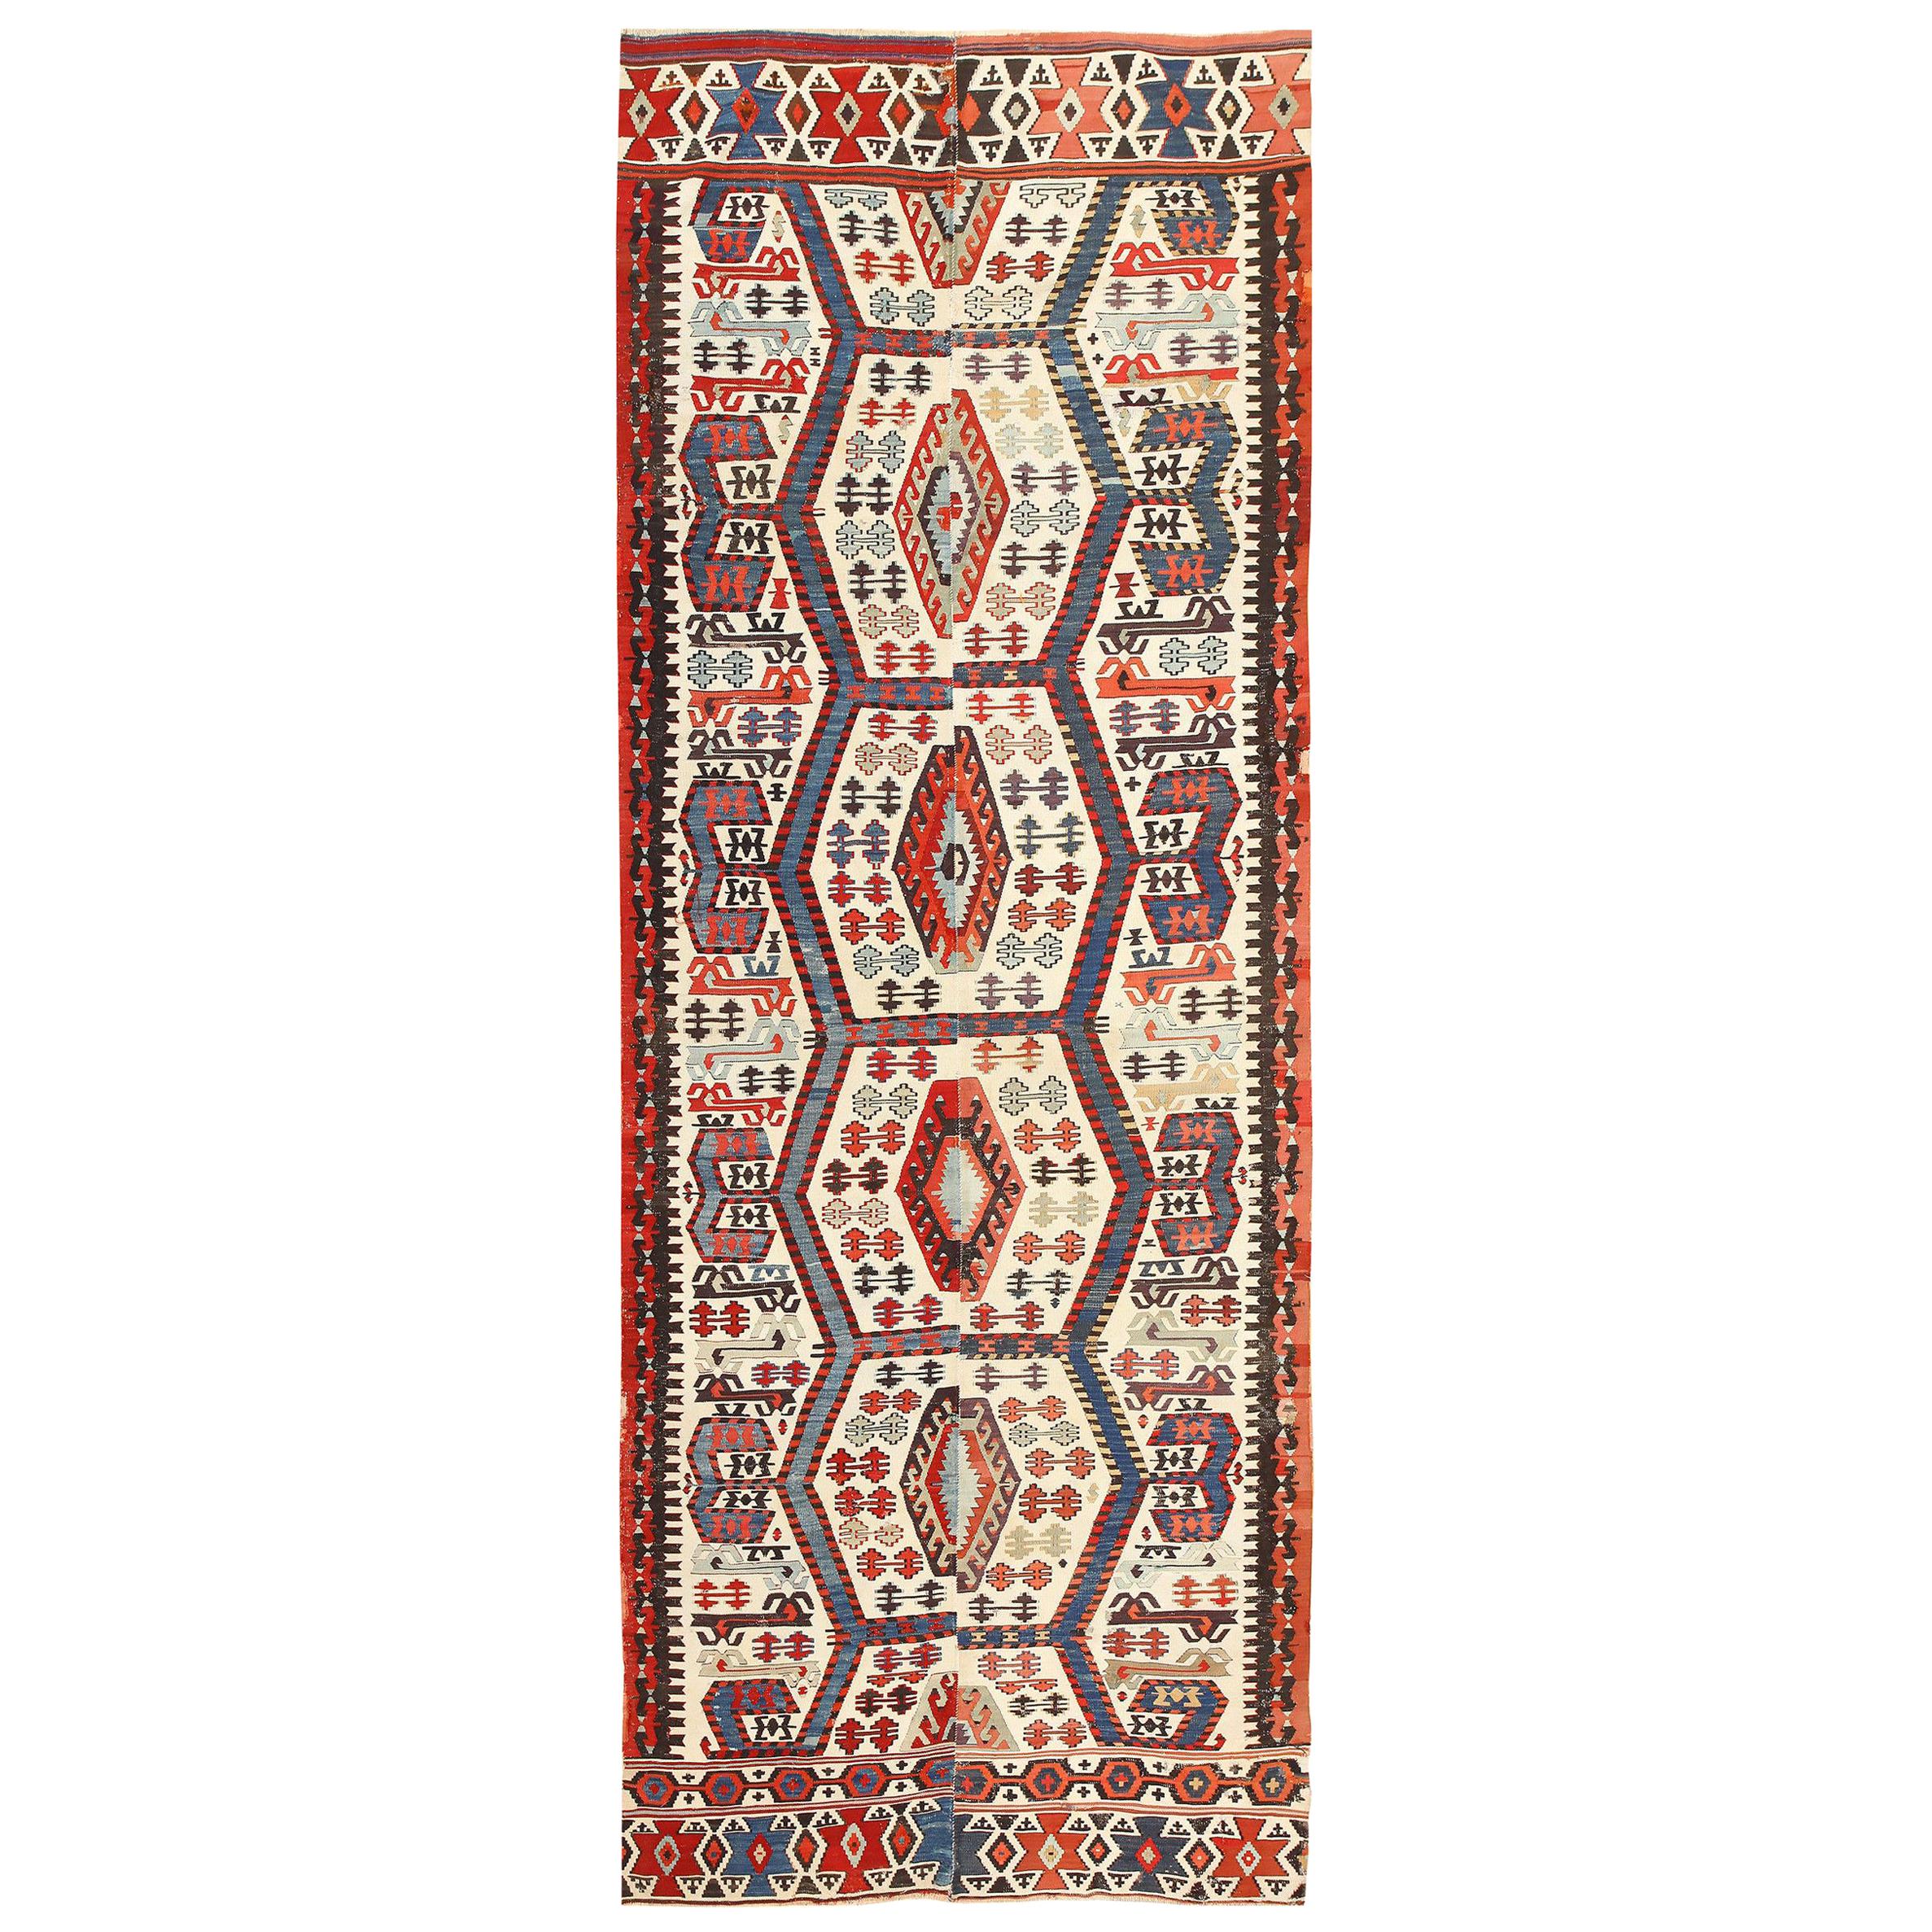 Antique Turkish Kilim. Size: 5 ft x 12 ft 8 in